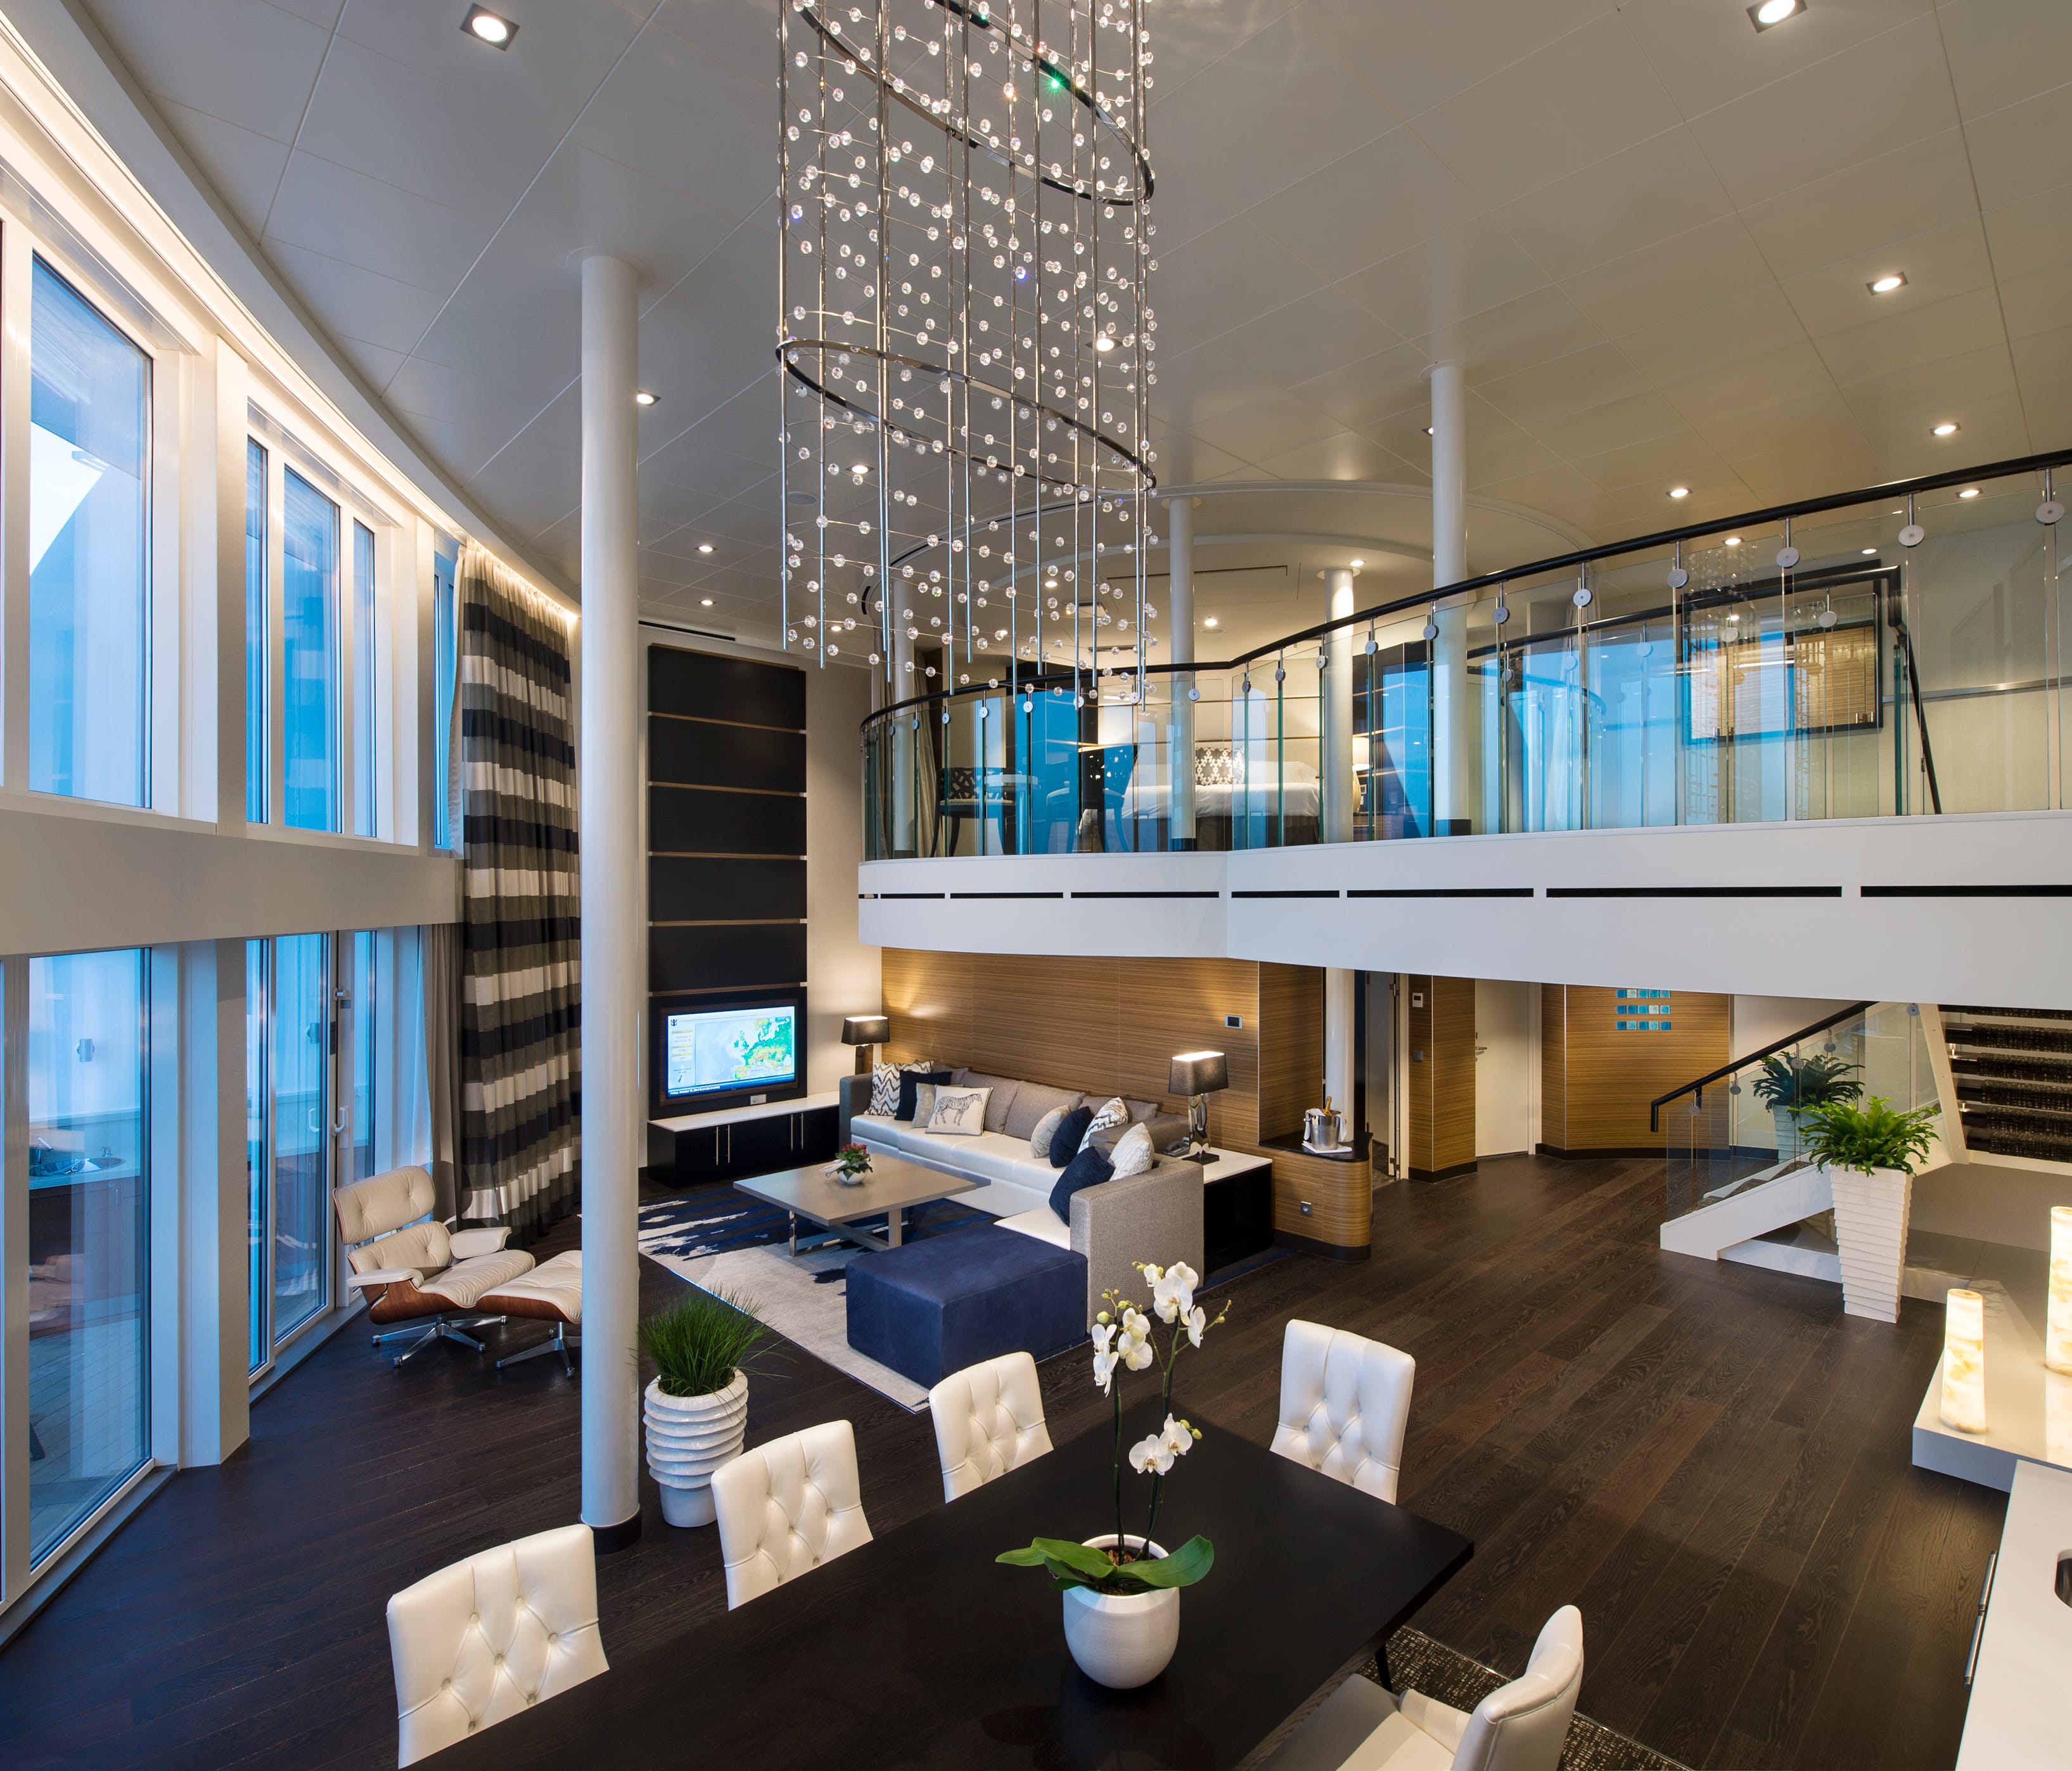 The Royal Loft suite on Royal Caribbean's Anthem of the Seas spans two decks and measures more than 1,600 square feet.